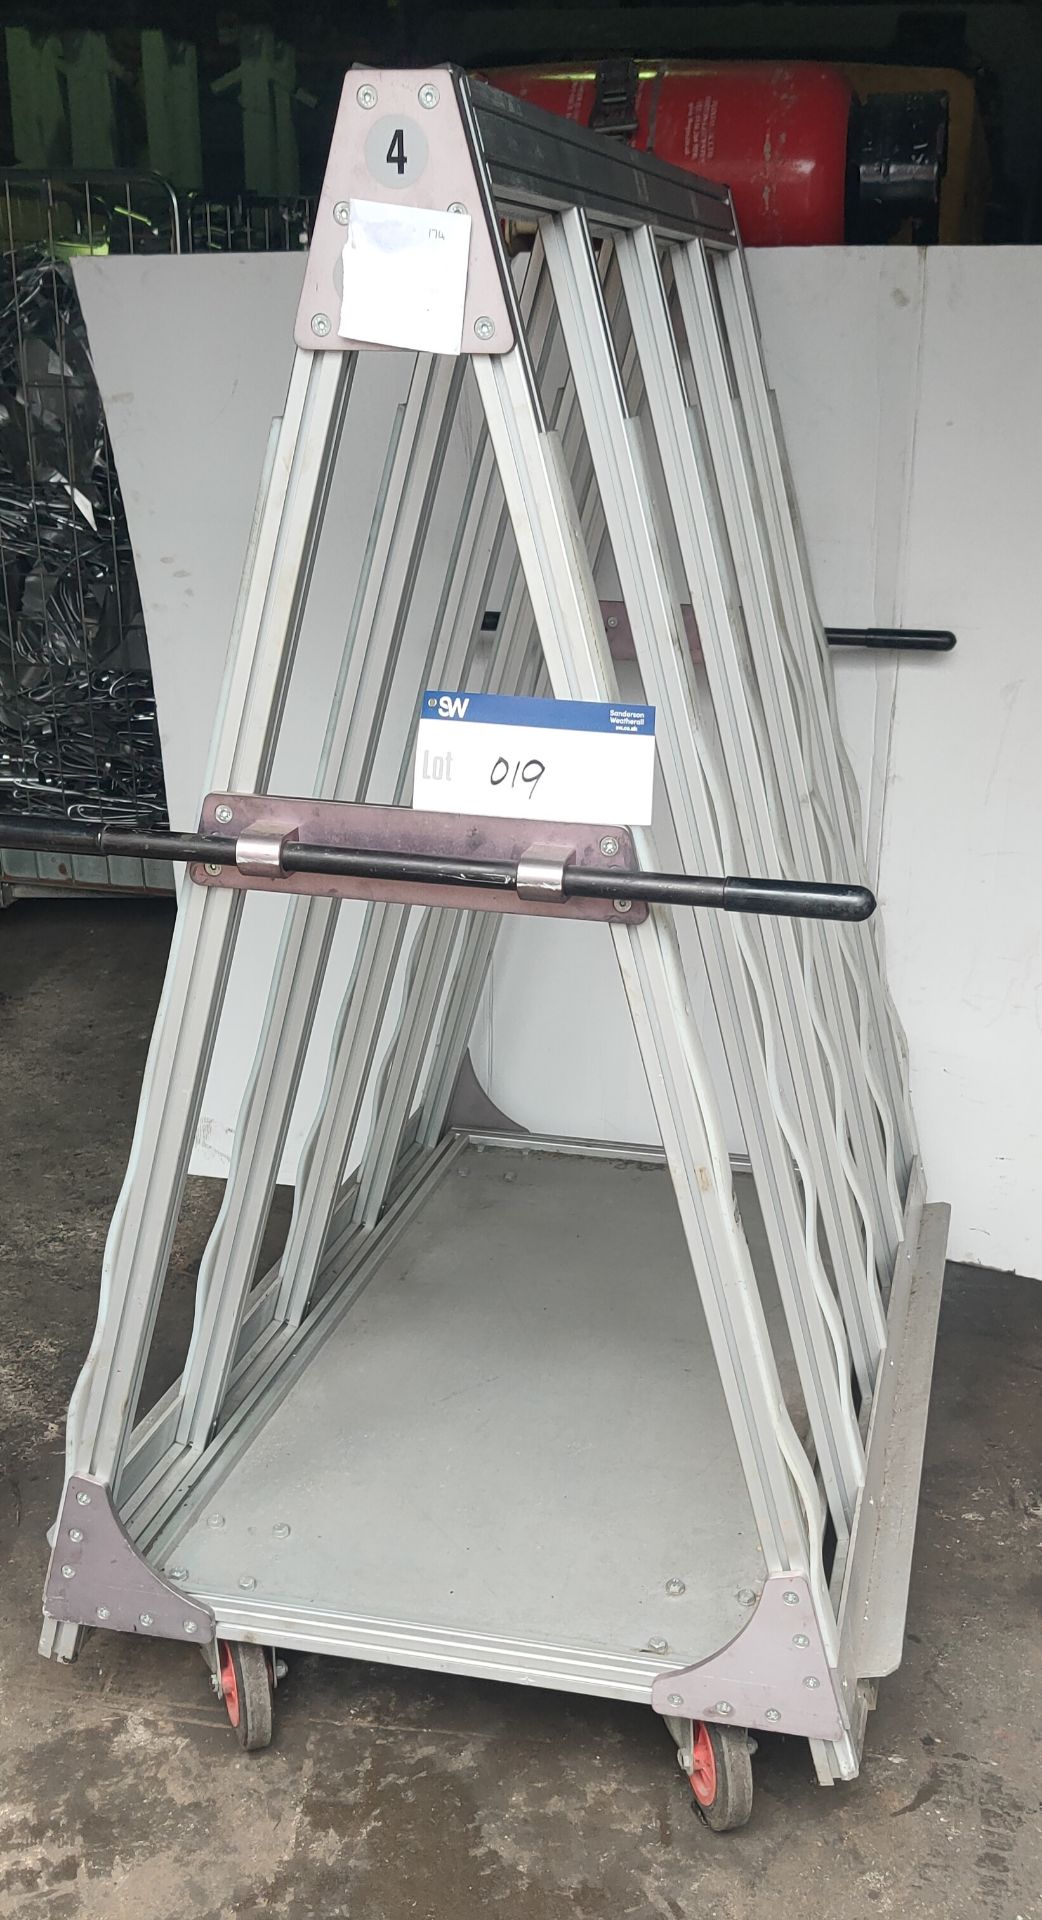 Aluminium Glass Transporters, approx. 165cm x 140cm x 85cm, loading free of charge - yes (vendors - Image 2 of 2